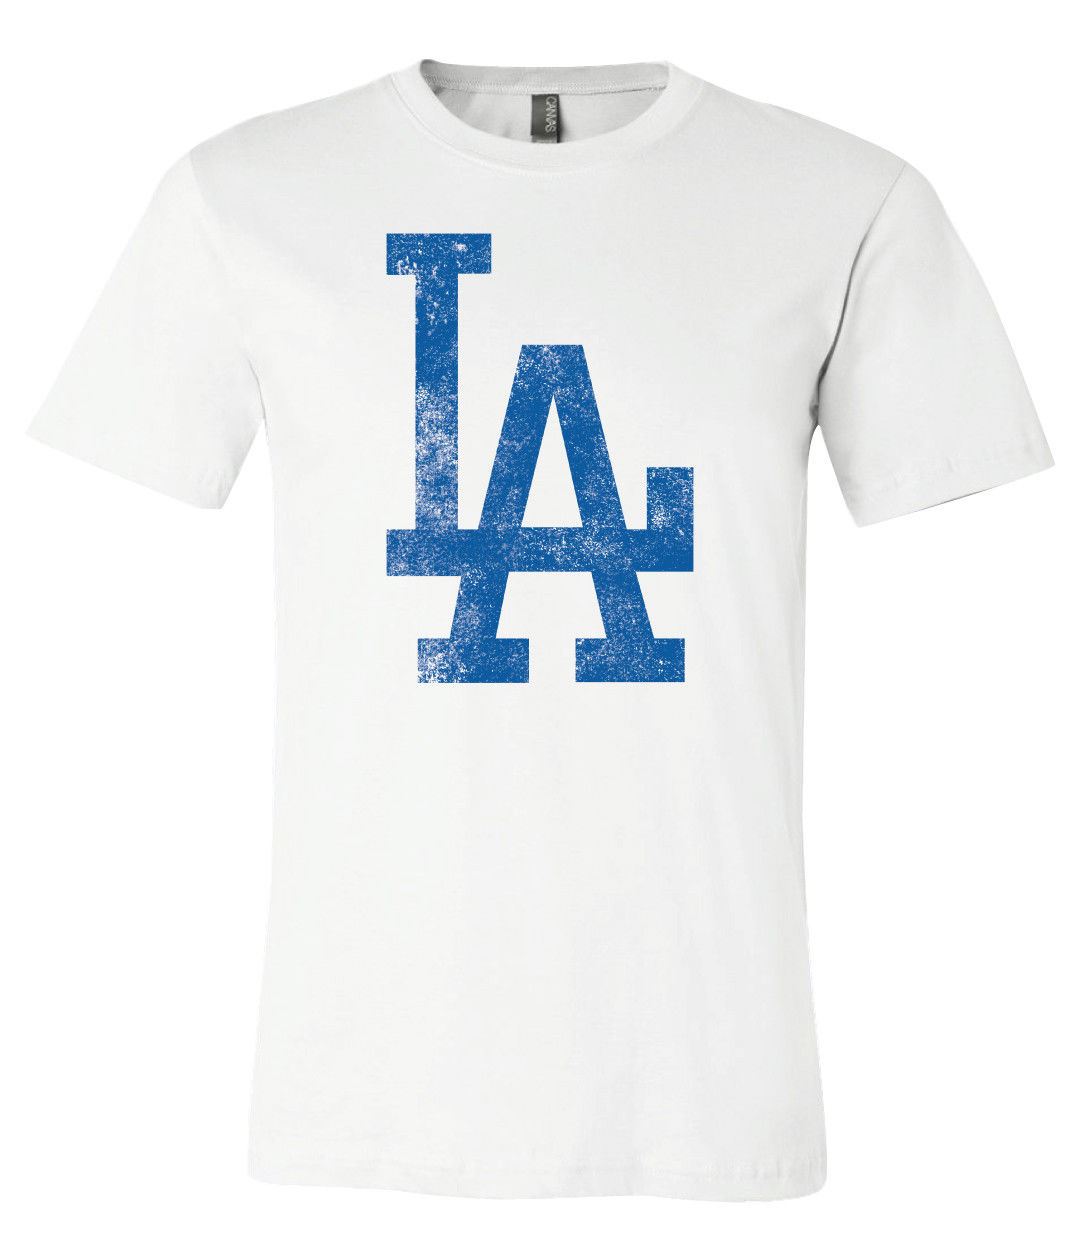 Los Angeles Angels of Anaheim text Distressed Vintage T-shirt 6 Sizes